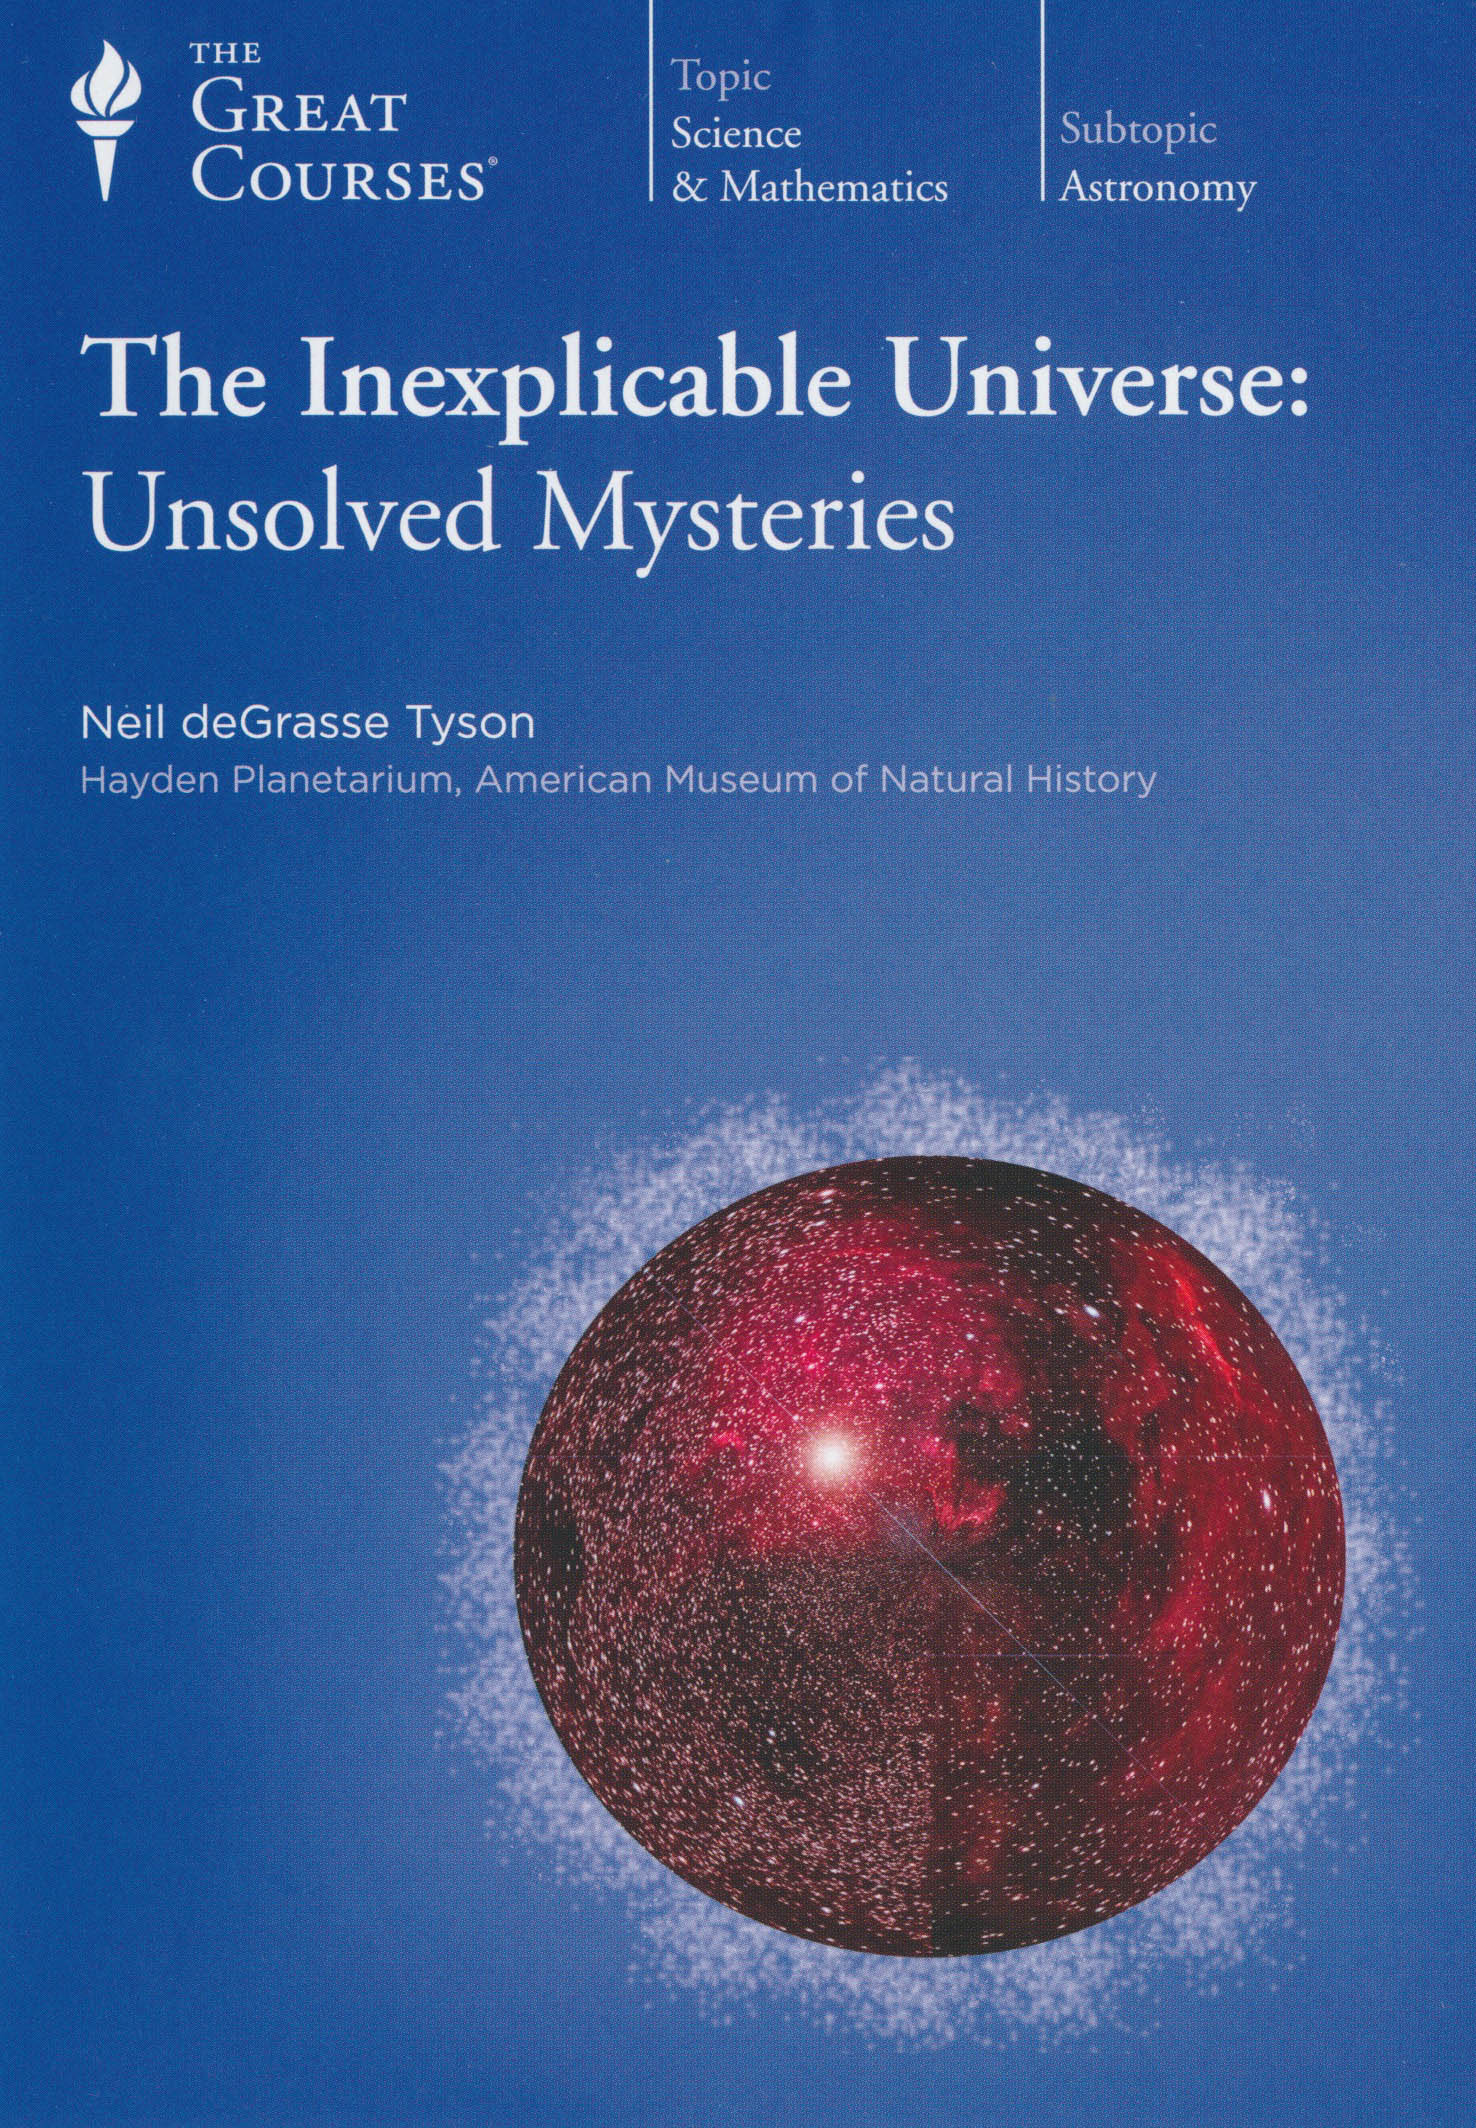 Link to The Inexplicable Universe page.